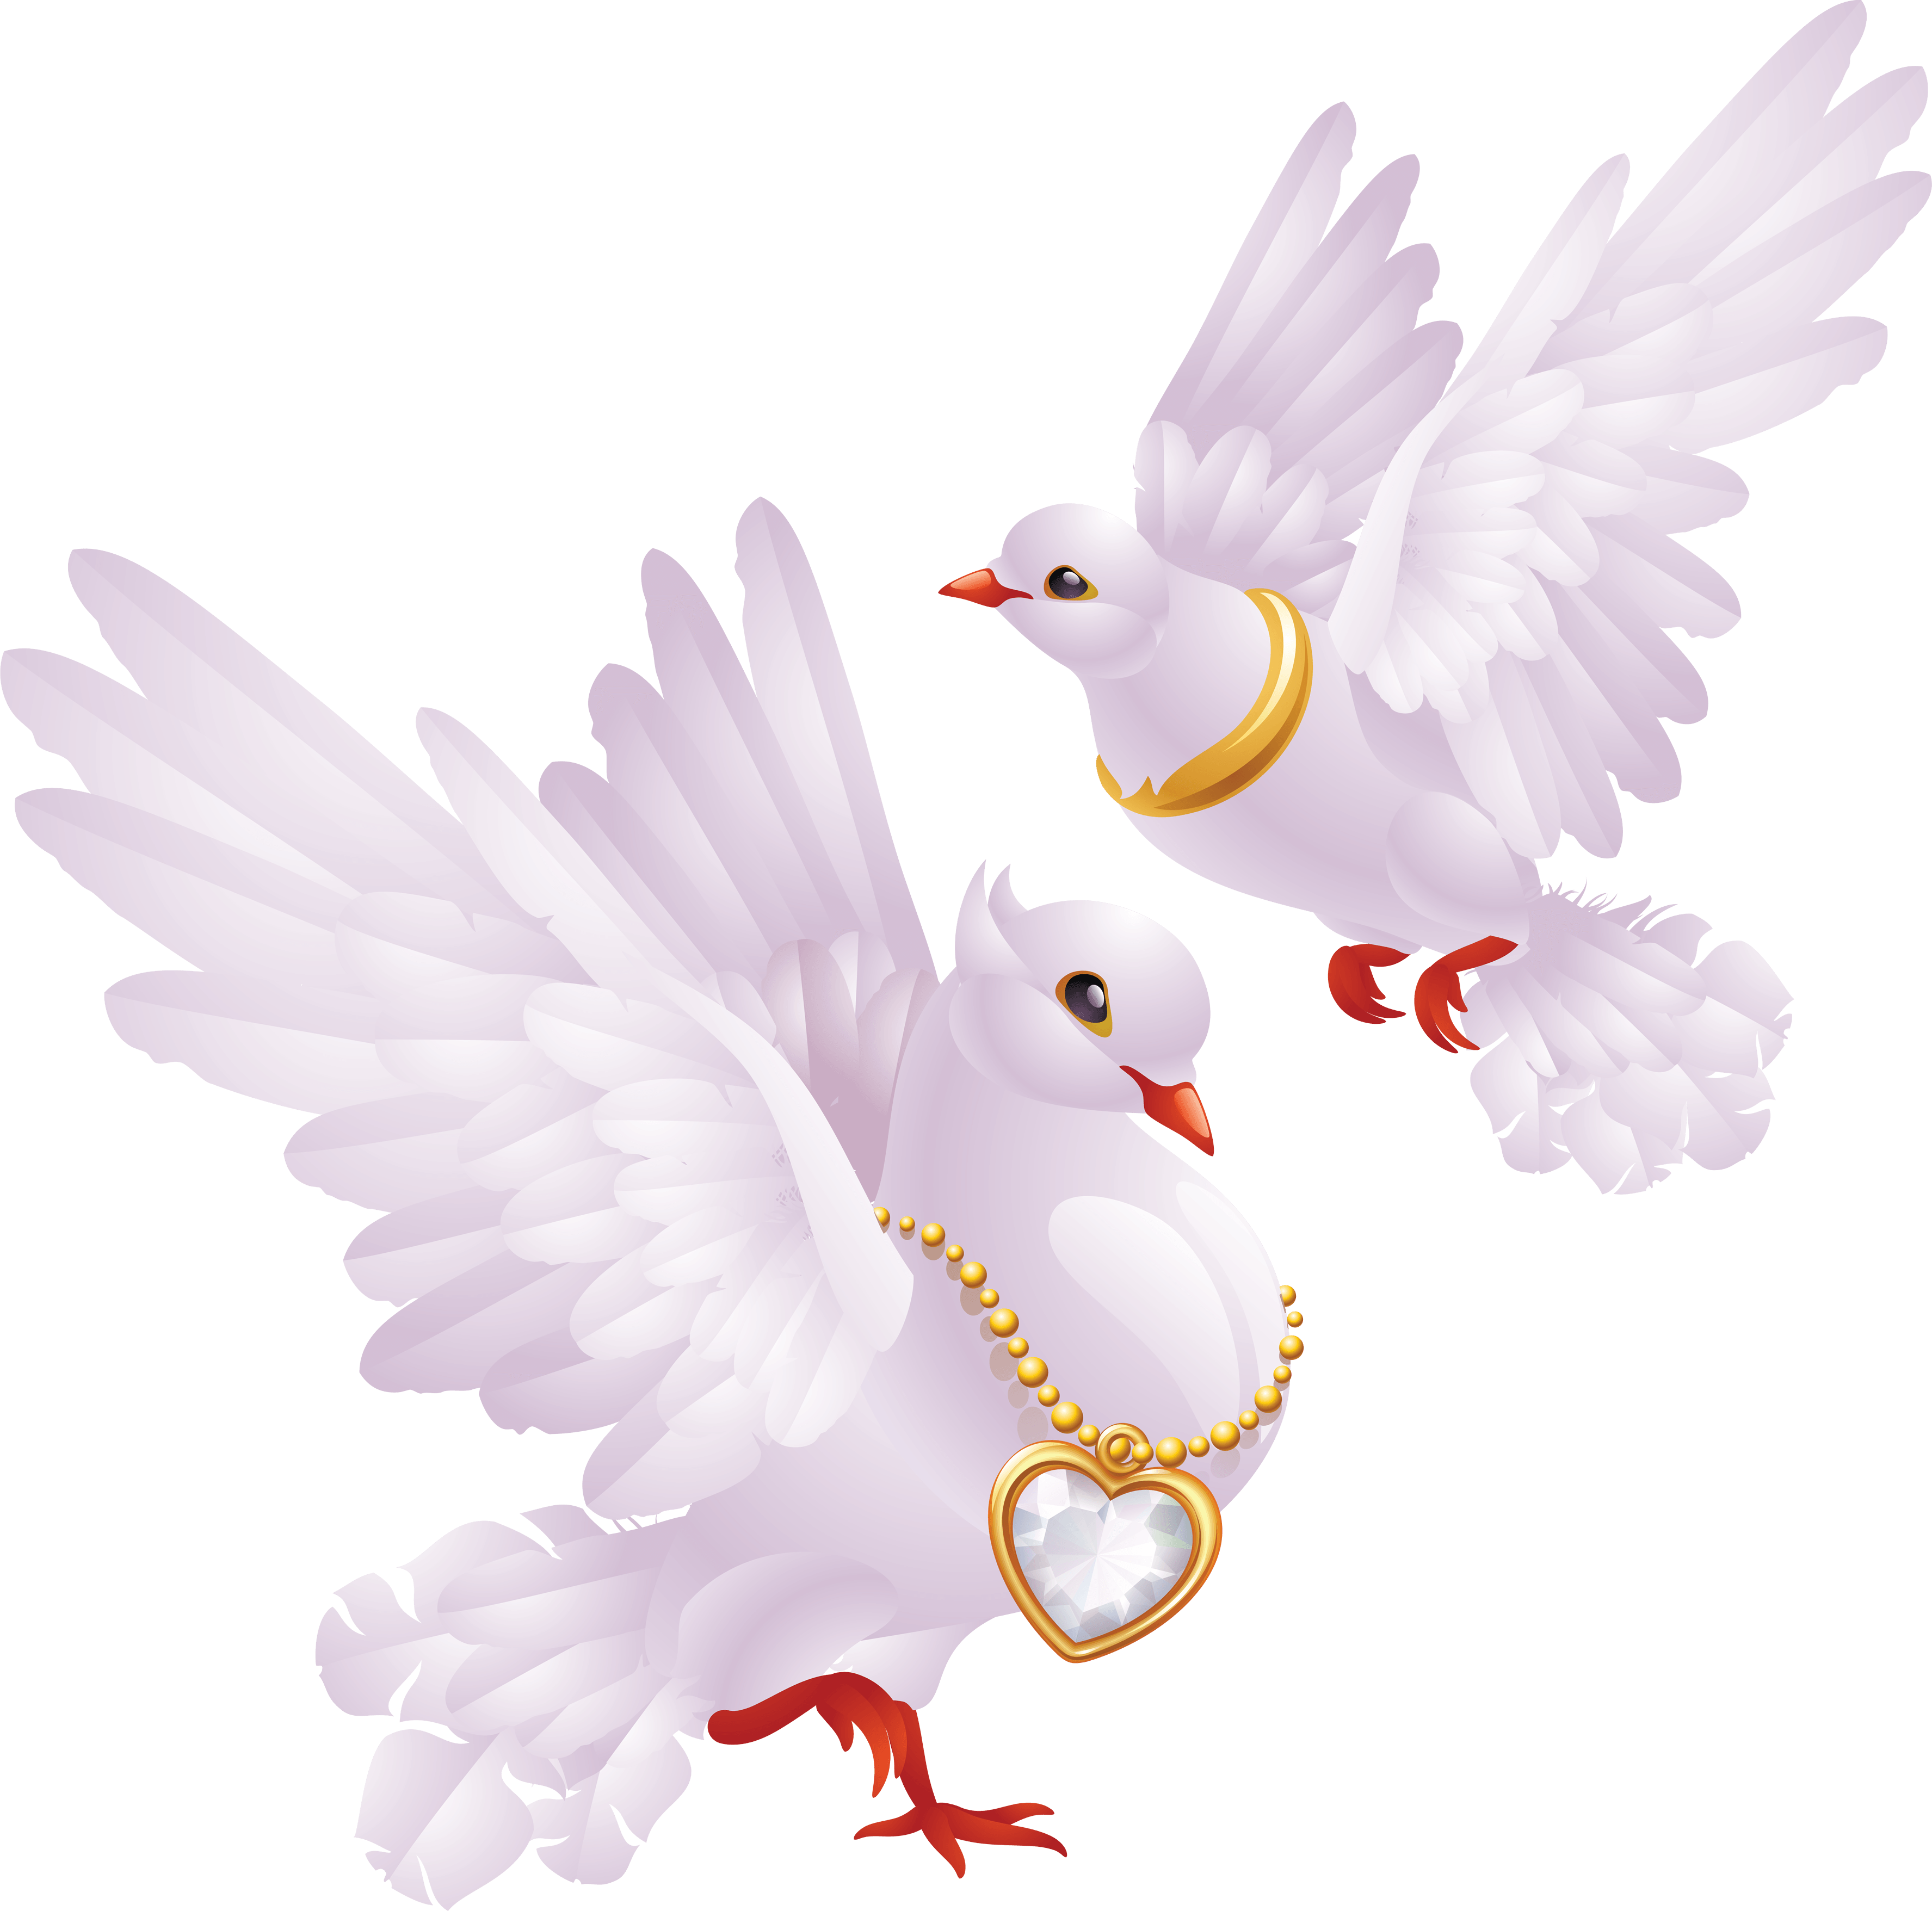 White Peace Pigeon PNG Image